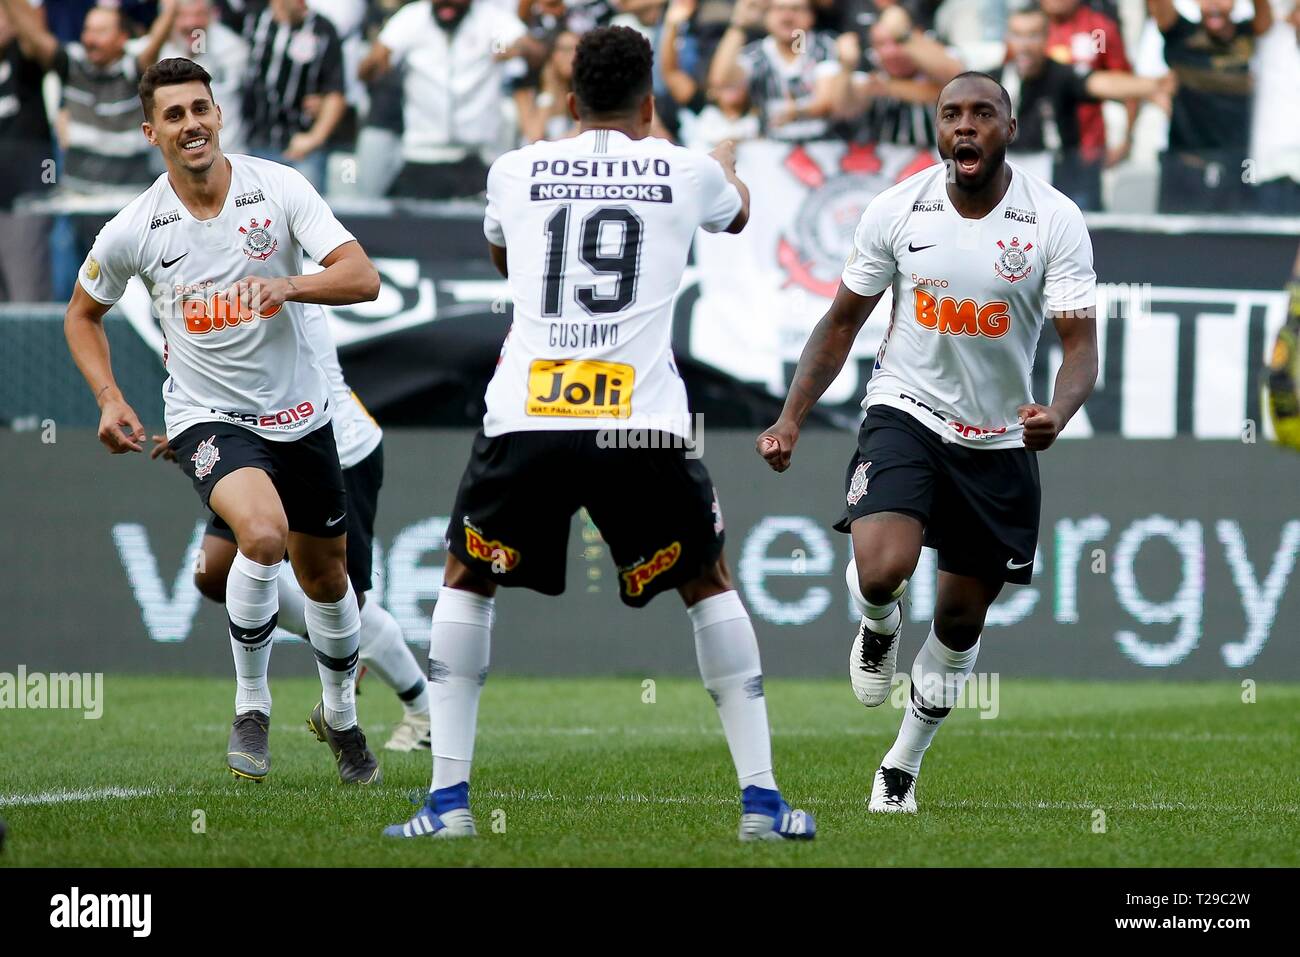 Sao Paulo Sp 31 03 19 Corinthians X Santos Celebration Of The First Goal Of Corinthians Marked By Manoel During Corinthians Vs Santos Match Valid For The Semifinal Of The Campeonato Paulista